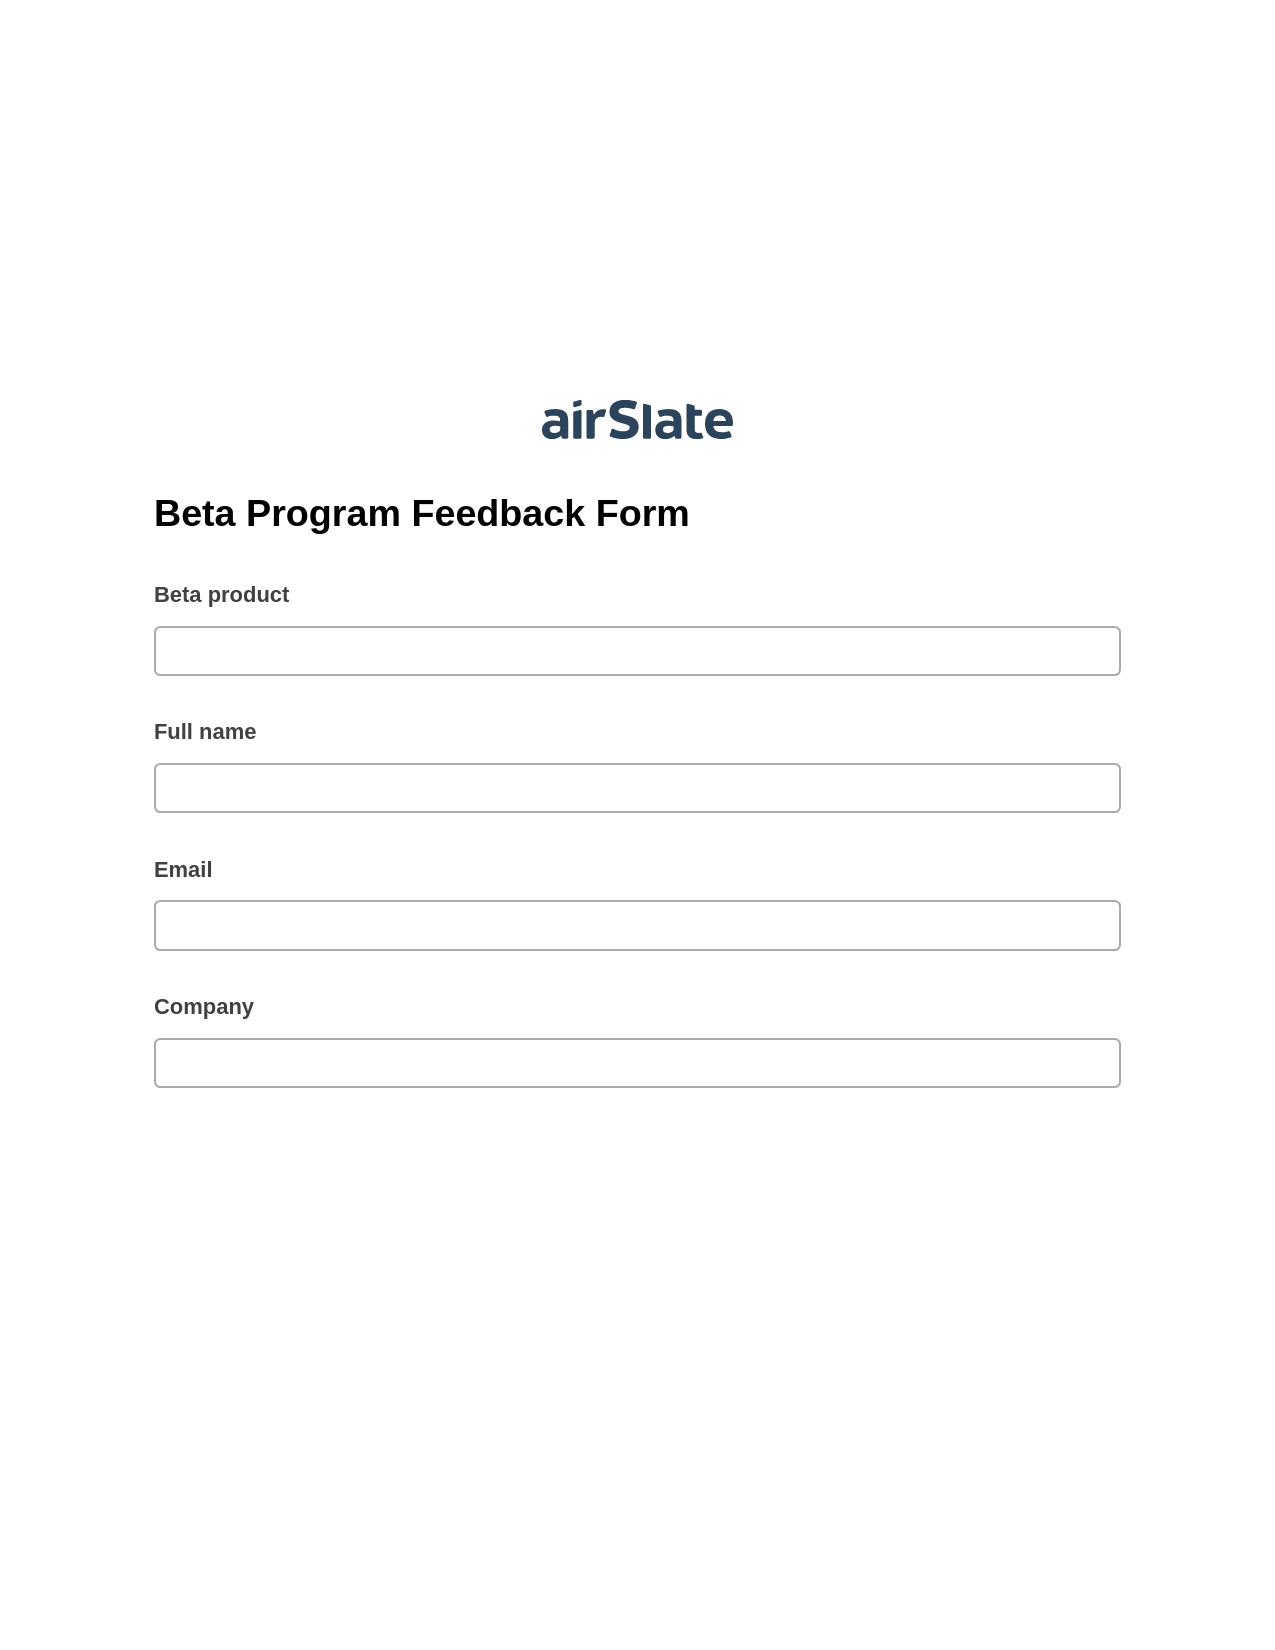 Multirole Beta Program Feedback Form Pre-fill from NetSuite Records Bot, Open as Role Bot, Export to Google Sheet Bot